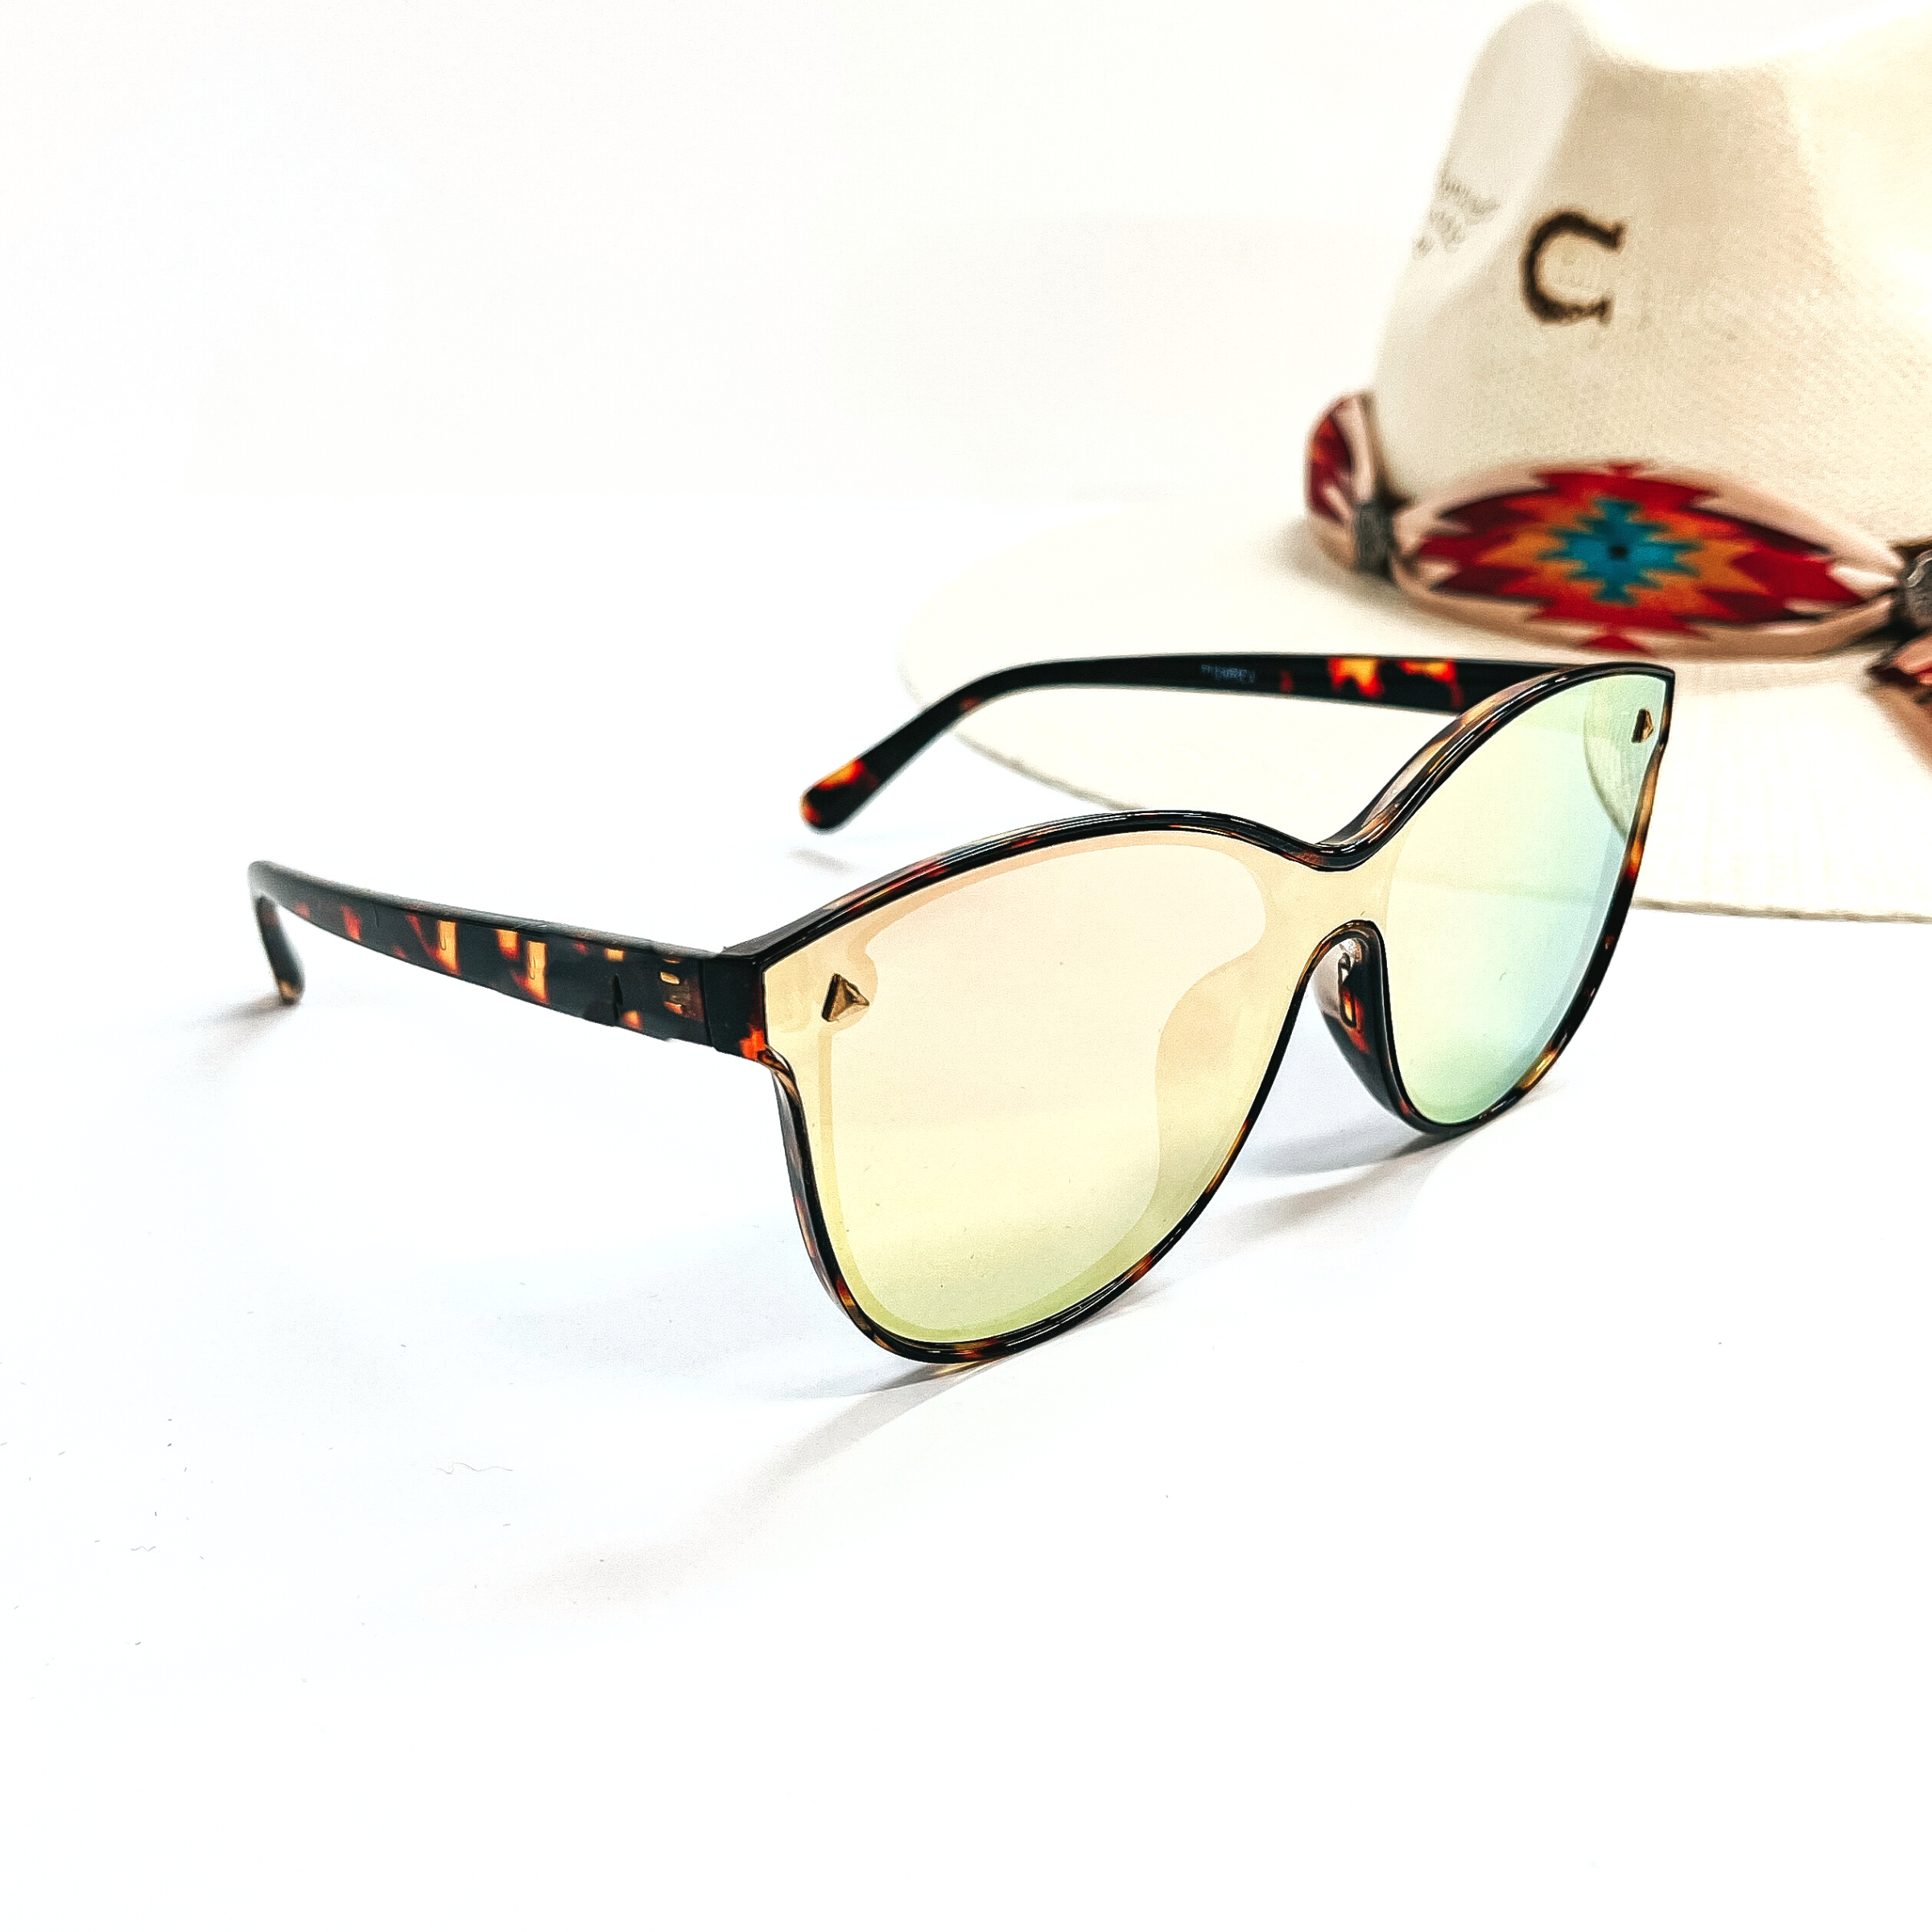 This is a pair of tortouise print  frame sunglasses with a green/coral/yellow  mirrored lense and silver tone  detailing. This pair of sunglasses are taken on a white background and an ivory straw hat  with a colorful aztec print hat band in the back as  decor.